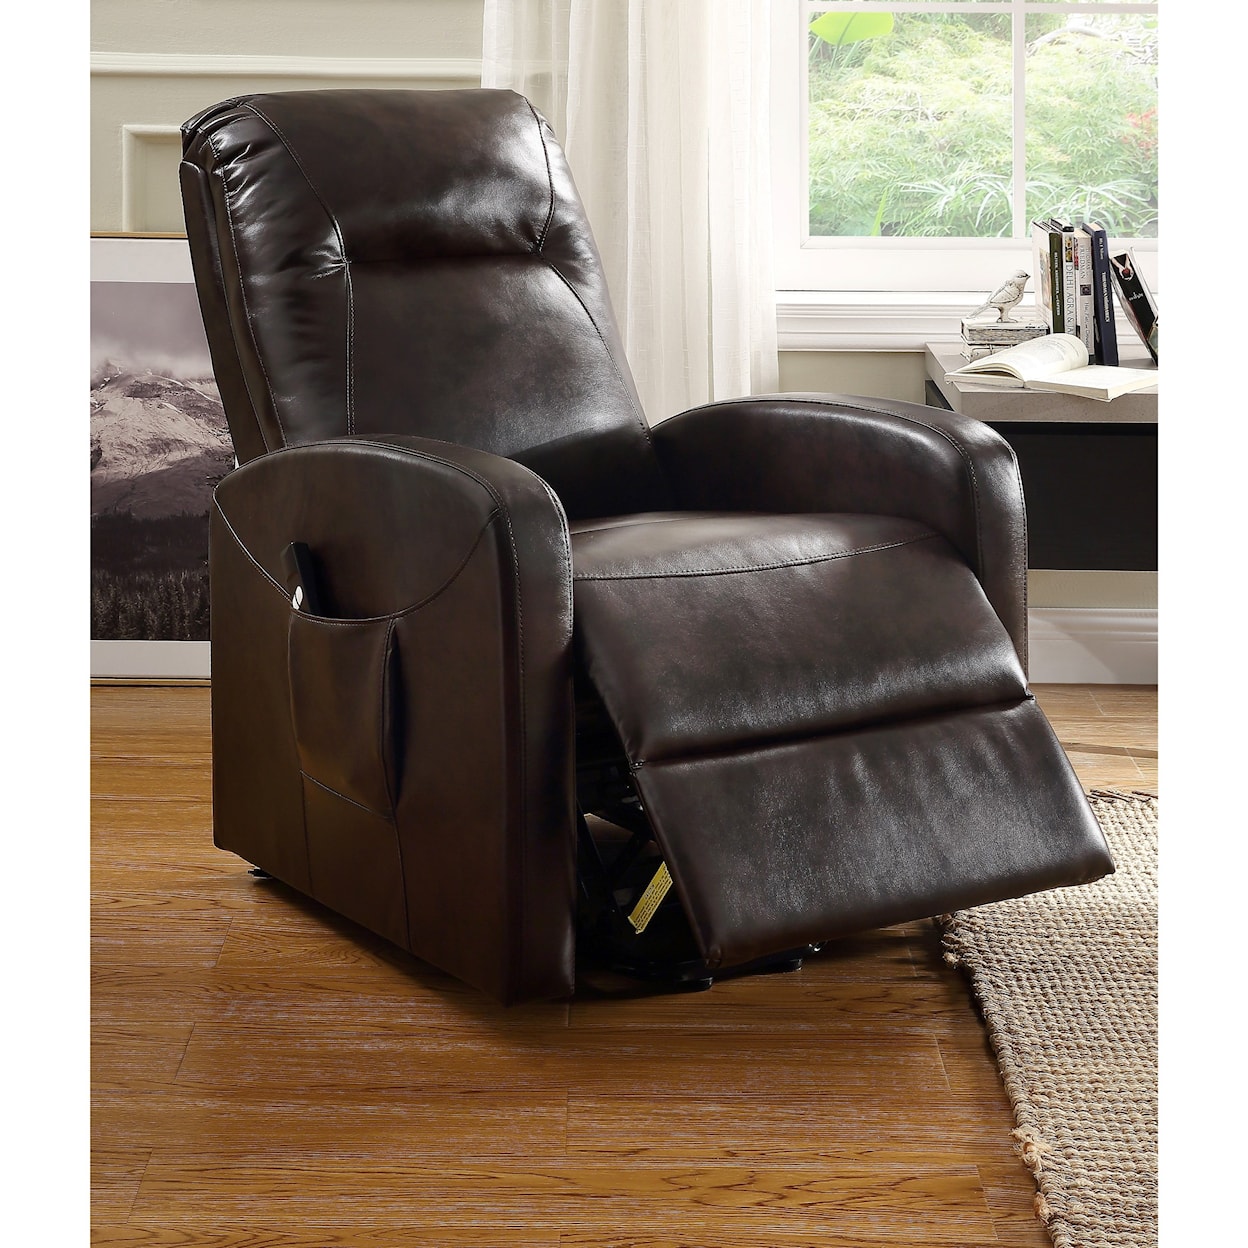 Acme Furniture Kasia Recliner with Power Lift